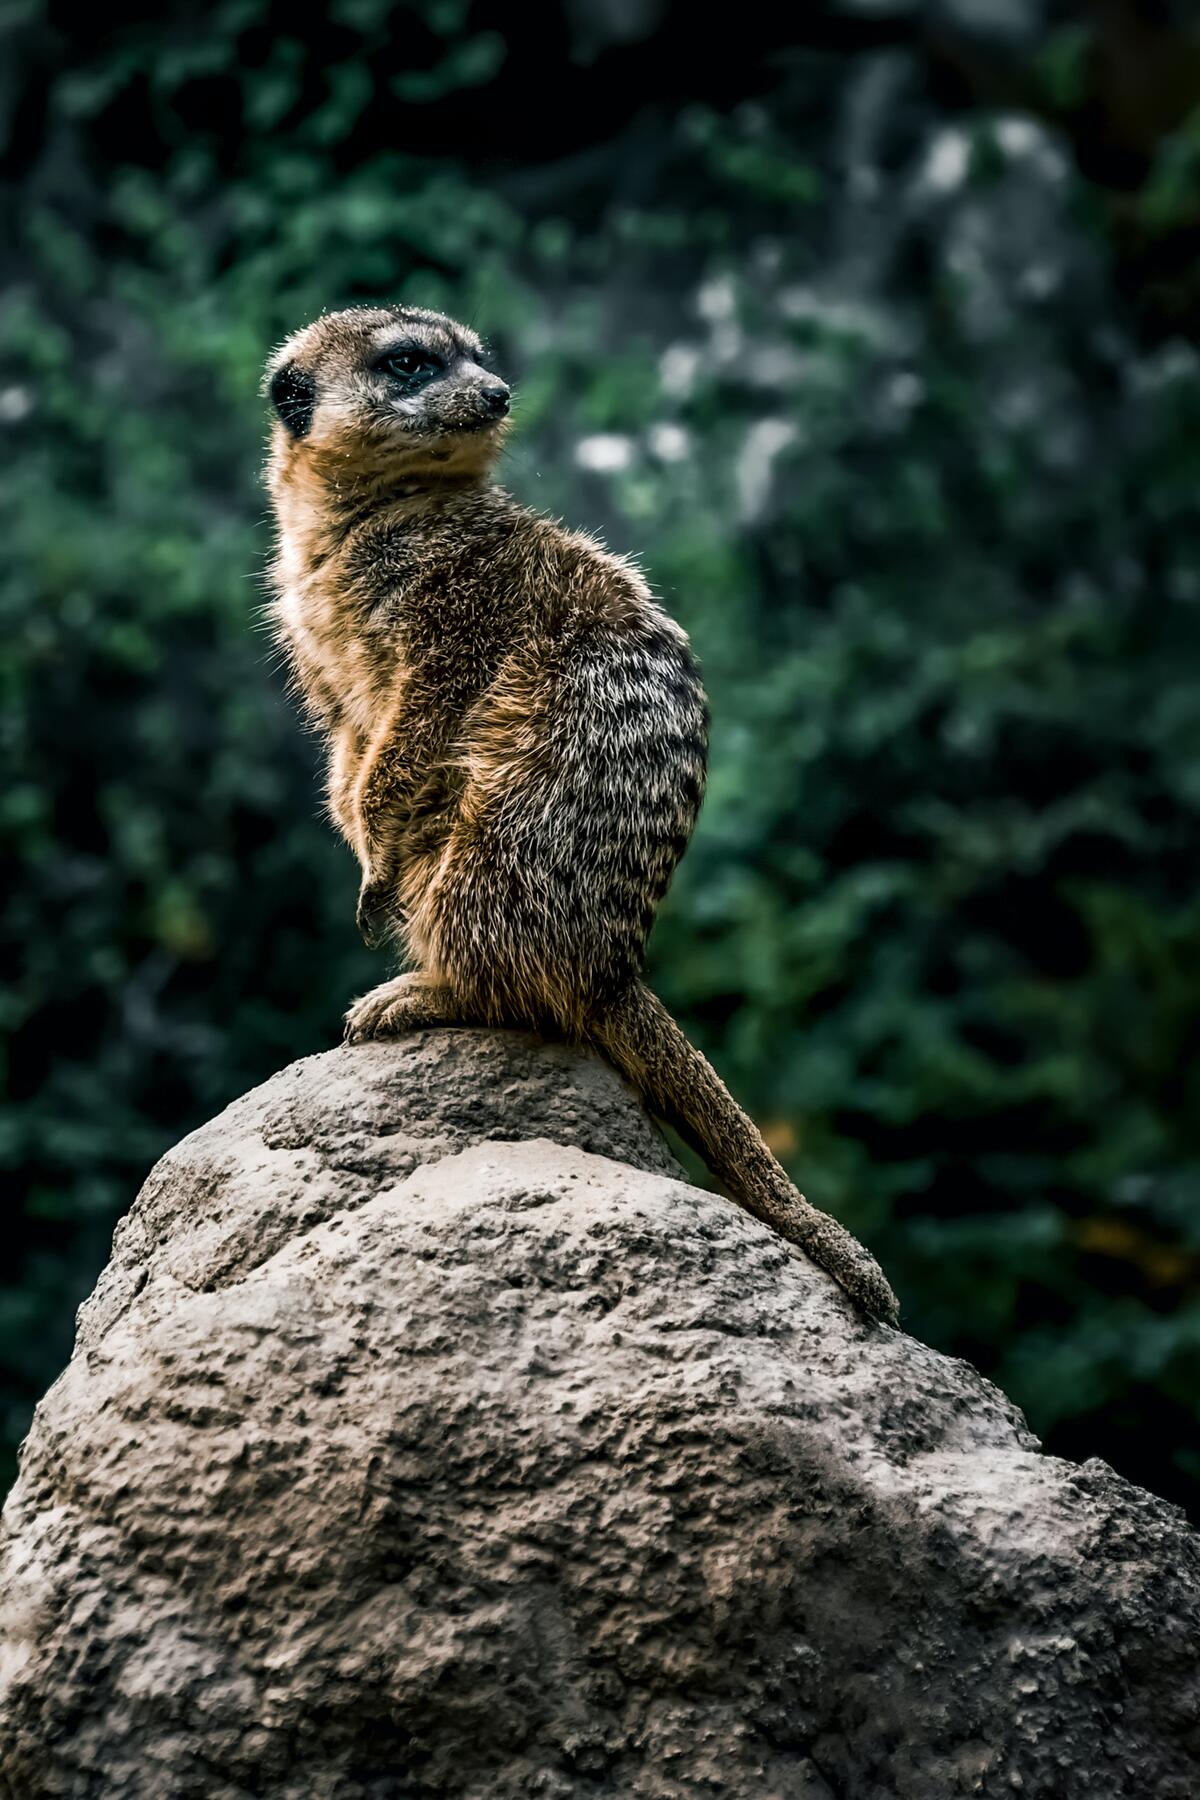 A meerkat sits on a rock and stares back.